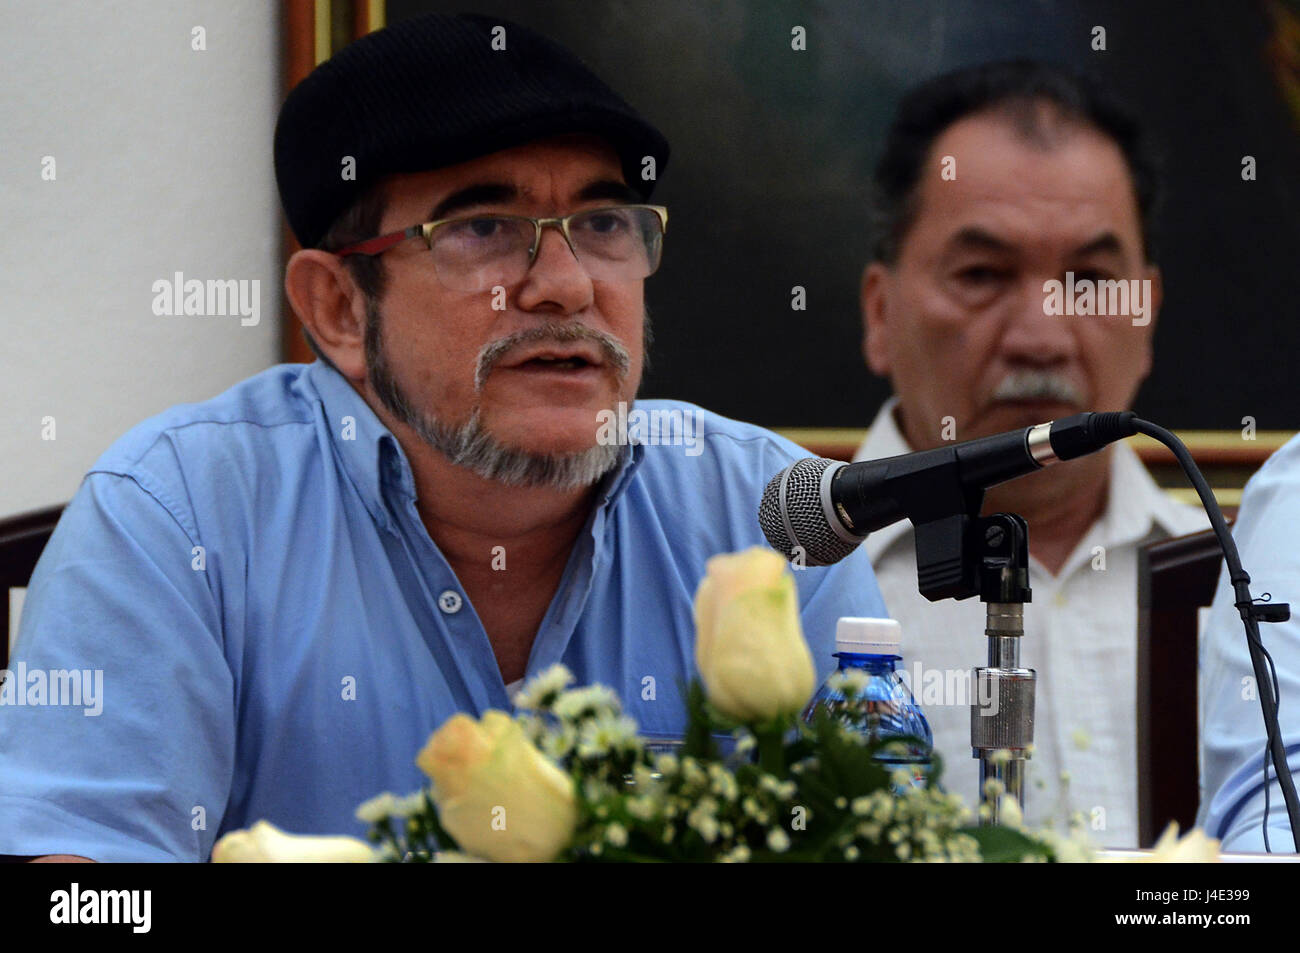 Havana, Cuba. 11th May, 2017. Rodrigo Londono (L), who is also known as Timoleon Jimenez, leader of the Revolutionary Armed Forces of Colombia (FARC), addresses a joint press conference in Havana, Cuba, on May 11, 2017. Colombia's top guerrilla groups on Thursday called for an end to political violence in the South American nation as well as the complete implementation of a peace process that will end over 50 years of armed conflict. Credit: Joaquin Hernandez/Xinhua/Alamy Live News Stock Photo